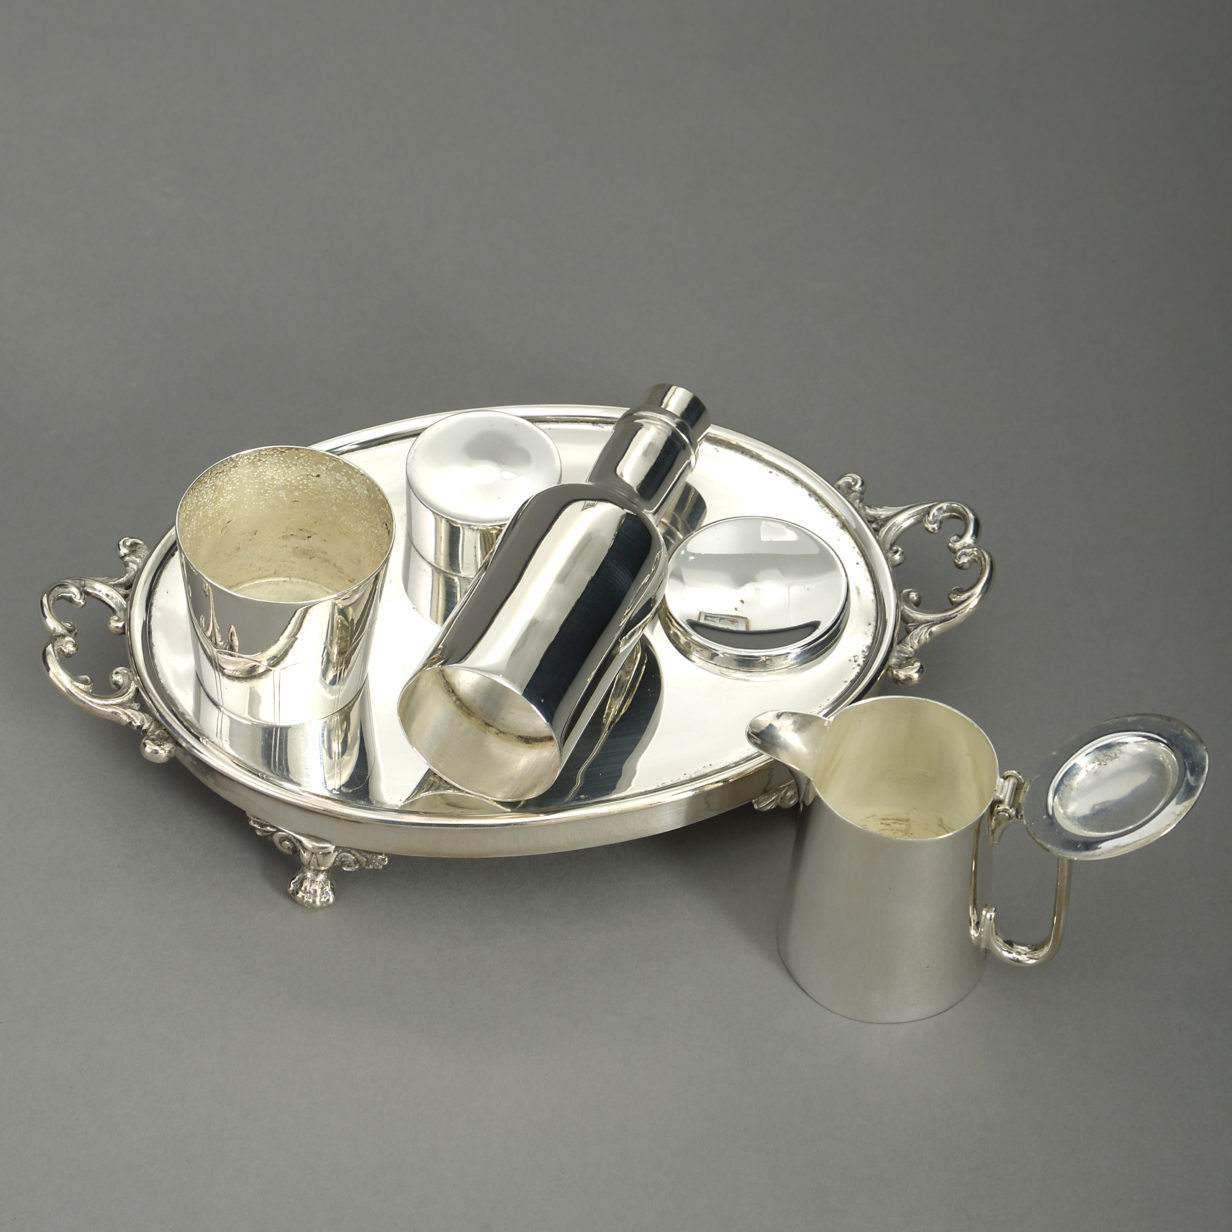 Victorian period mappin brothers silver-plated condiments set